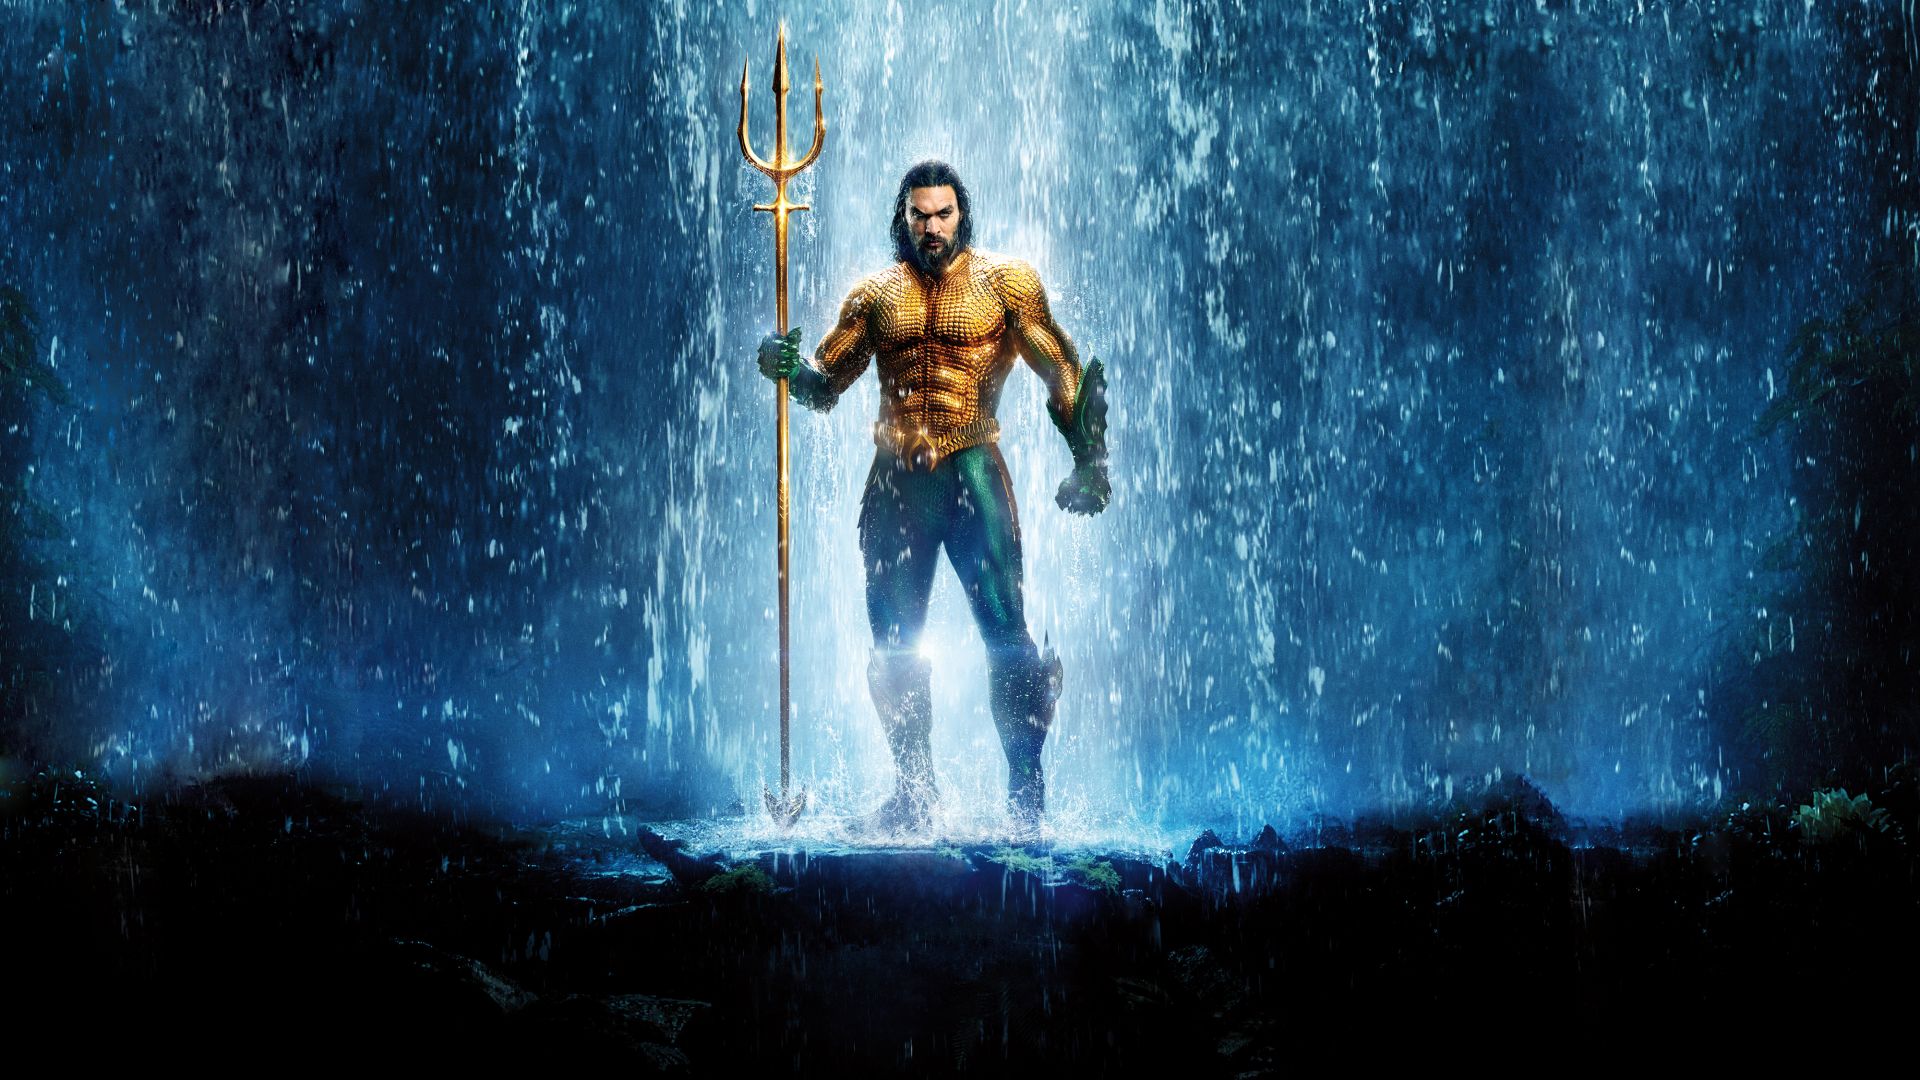 Aquaman, jason momoa, poster, 2018 wallpaper, HD image, picture, background, aa3cce